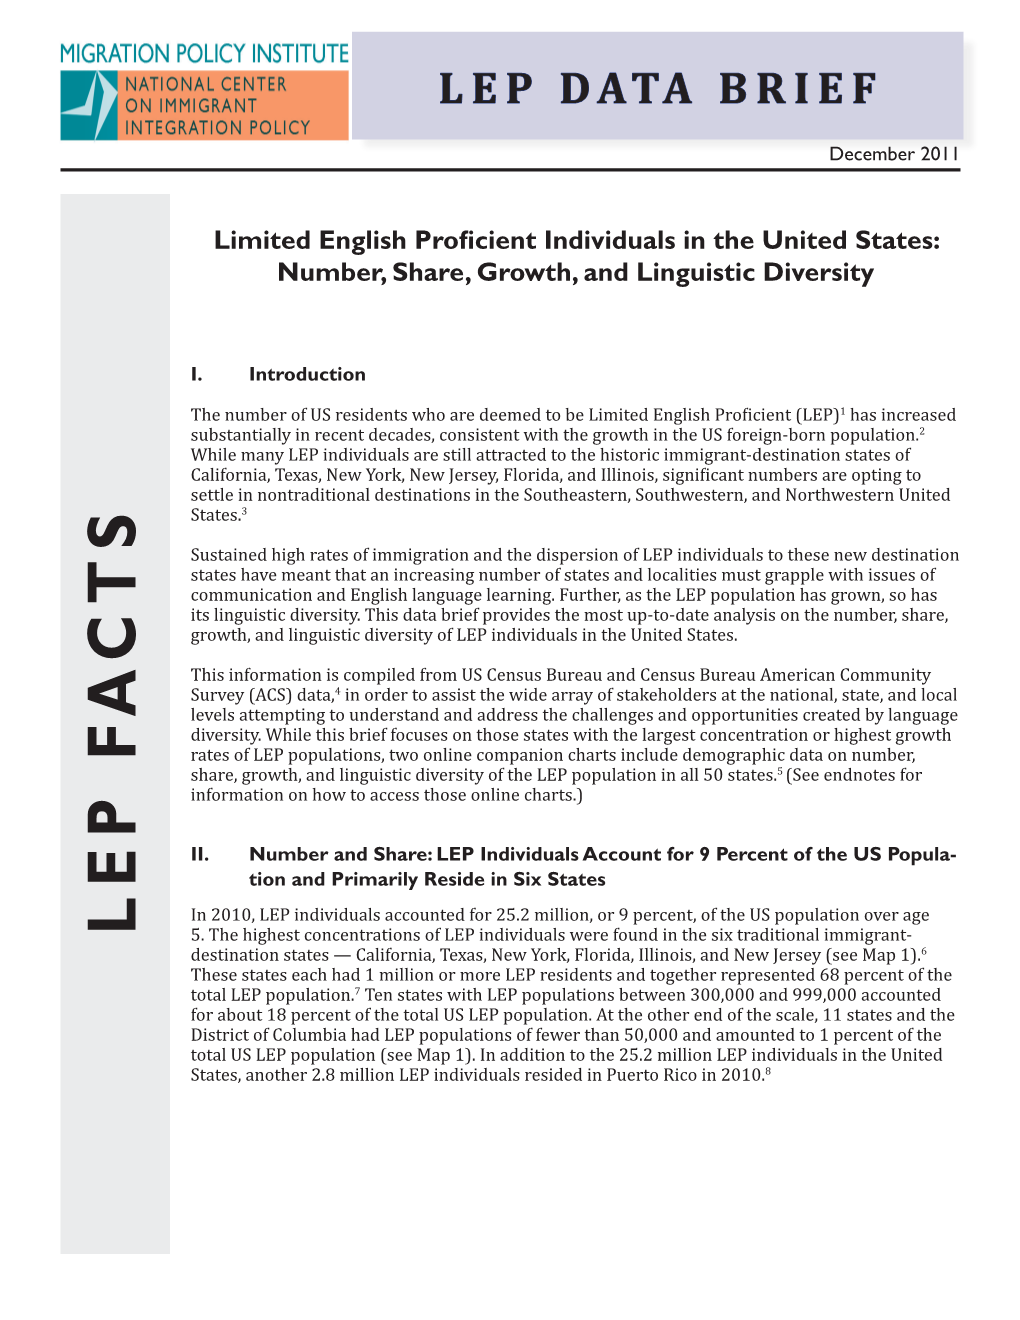 Limited English Proficient Individuals in the United States: Number, Share, Growth, and Linguistic Diversity